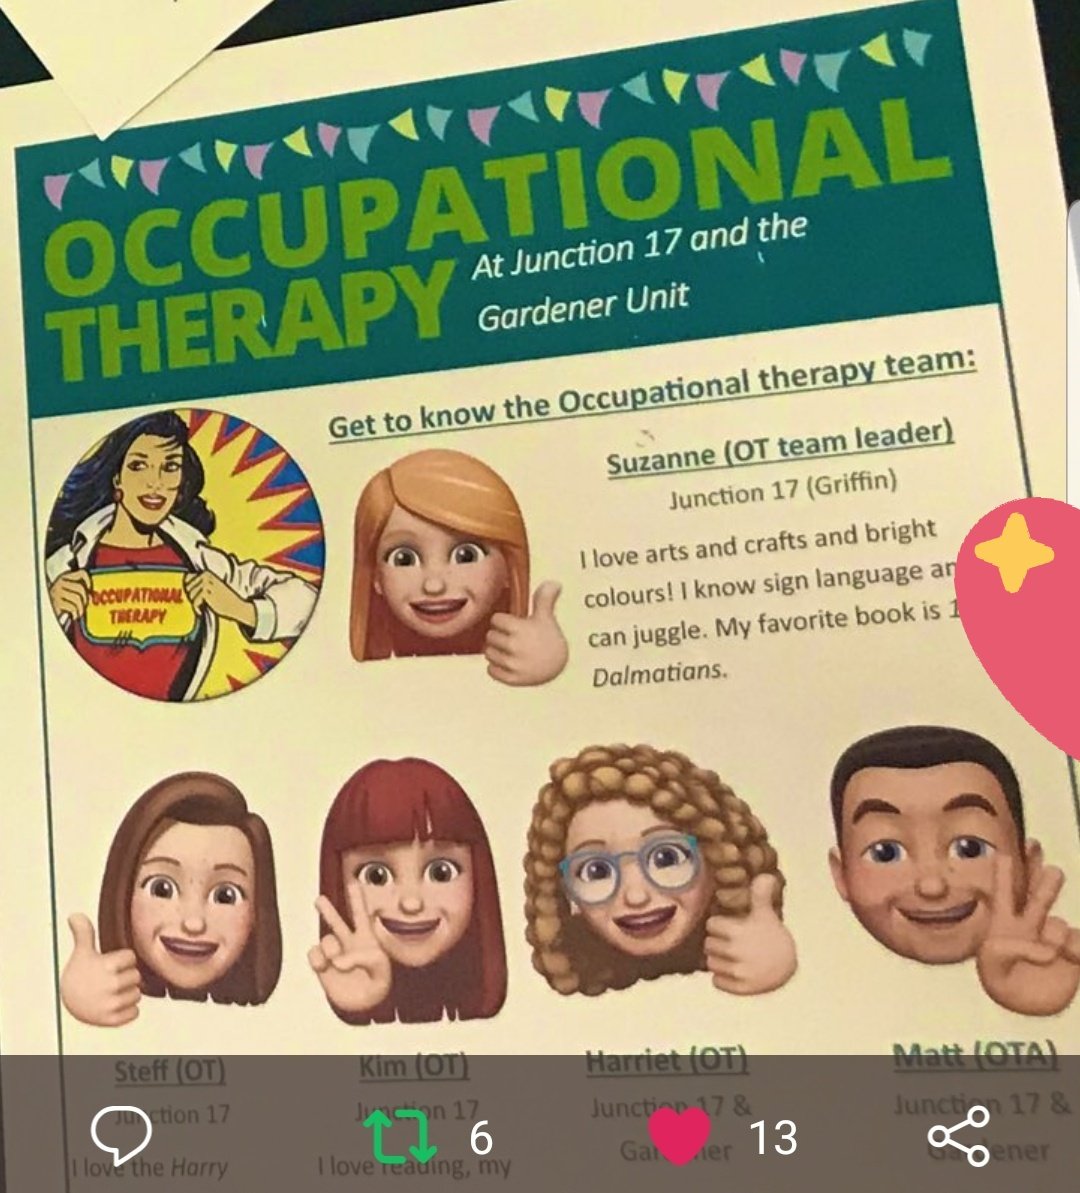 Love our occupational therapy team emojis @GMMH_NHS #gmmhot #CAMHS #OccupationalTherapyWeek